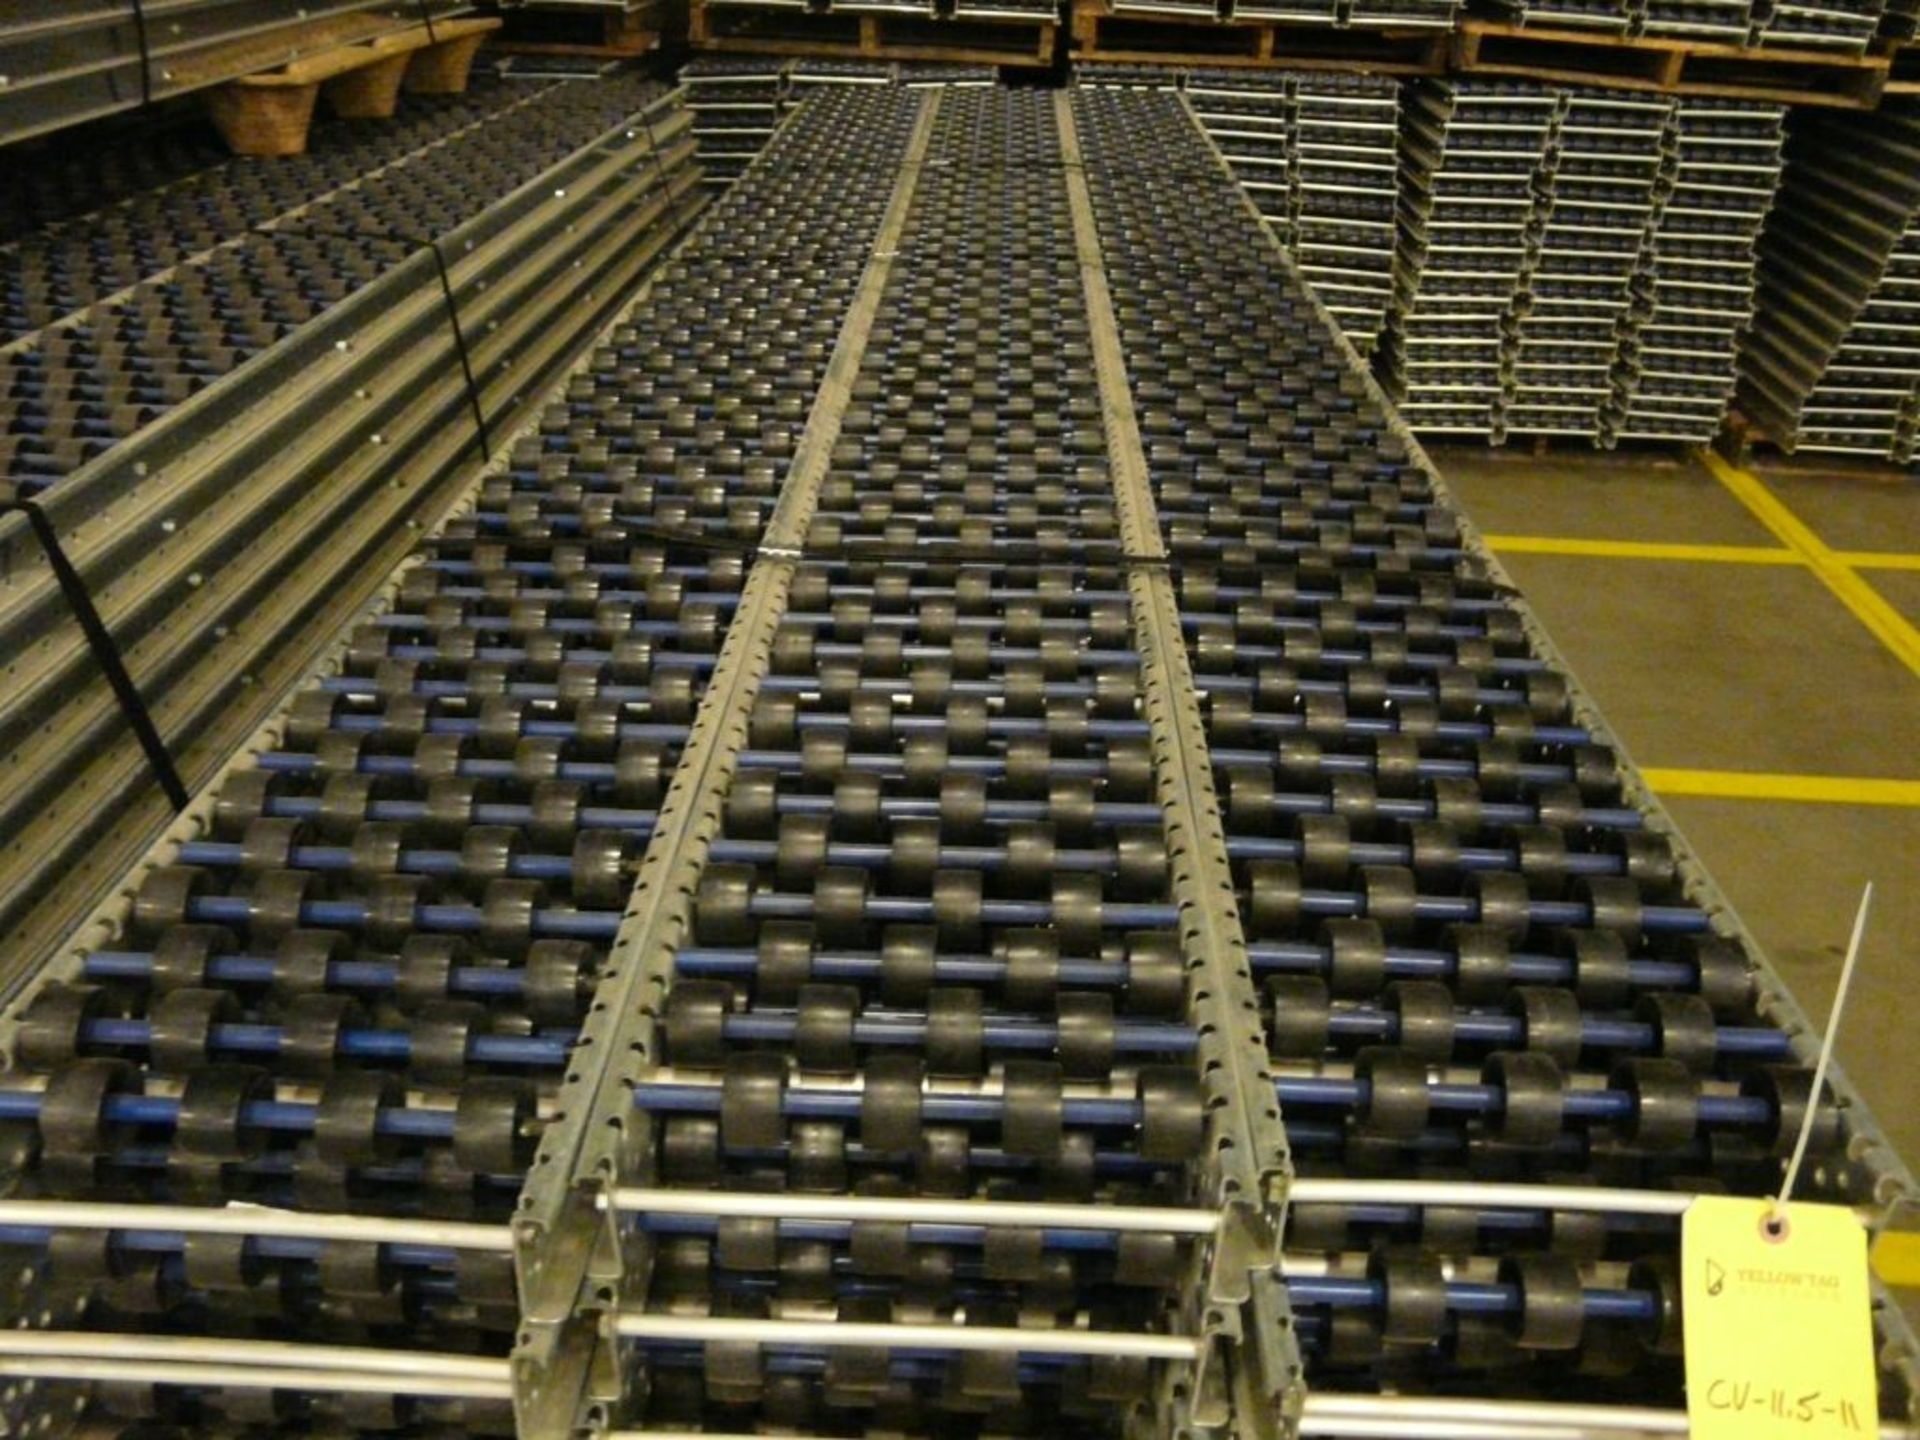 Lot of (90) SpanTrack Wheelbed Carton Flow Conveyors - 11.5'L x 11"W; Tag: 223550 - $30 Lot - Image 3 of 4